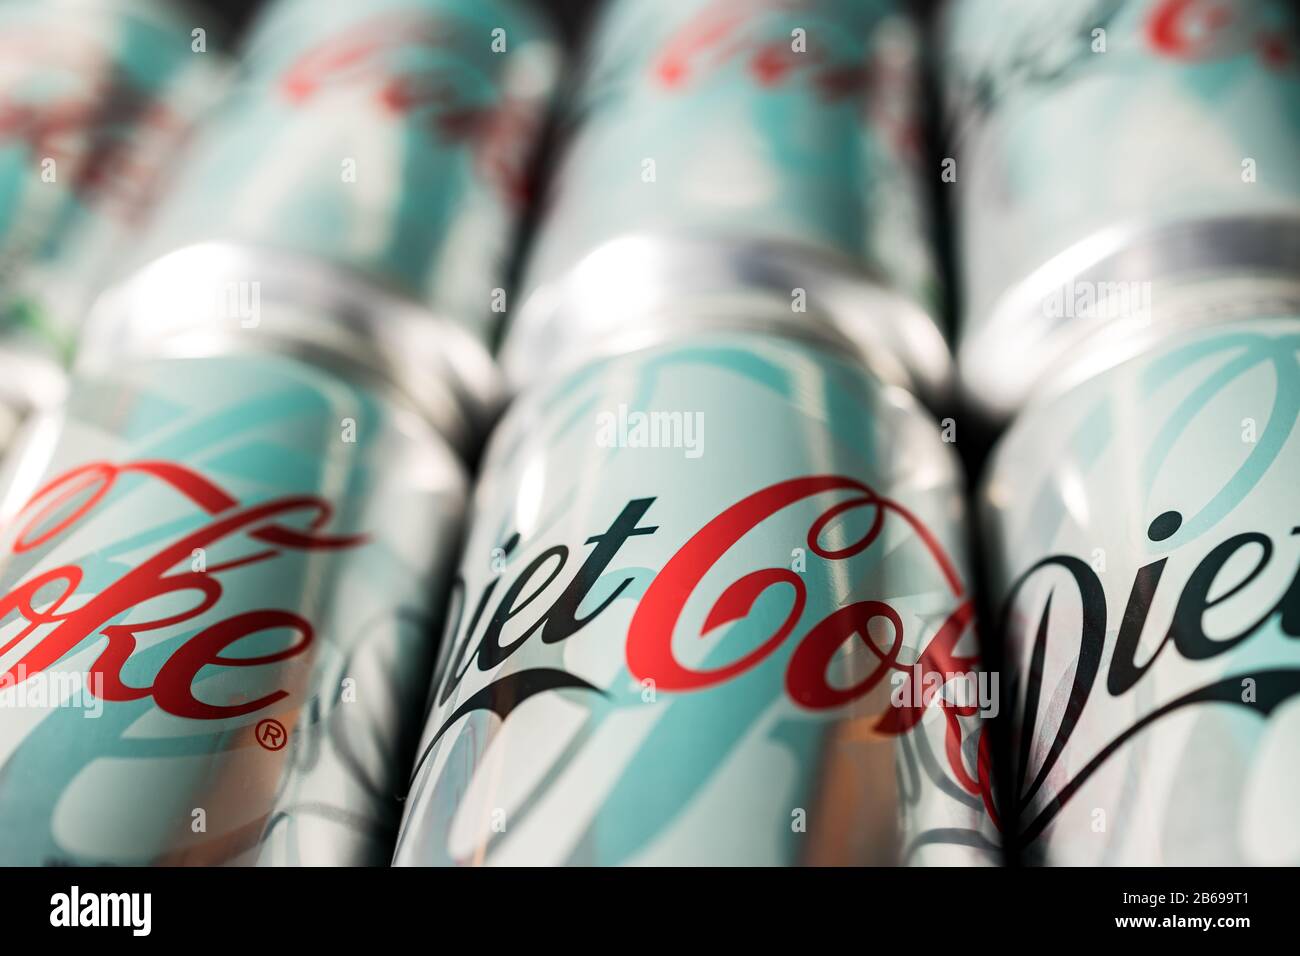 LONDON - MARCH 03, 2020: Diet Coke cans in metal silver tins Stock Photo